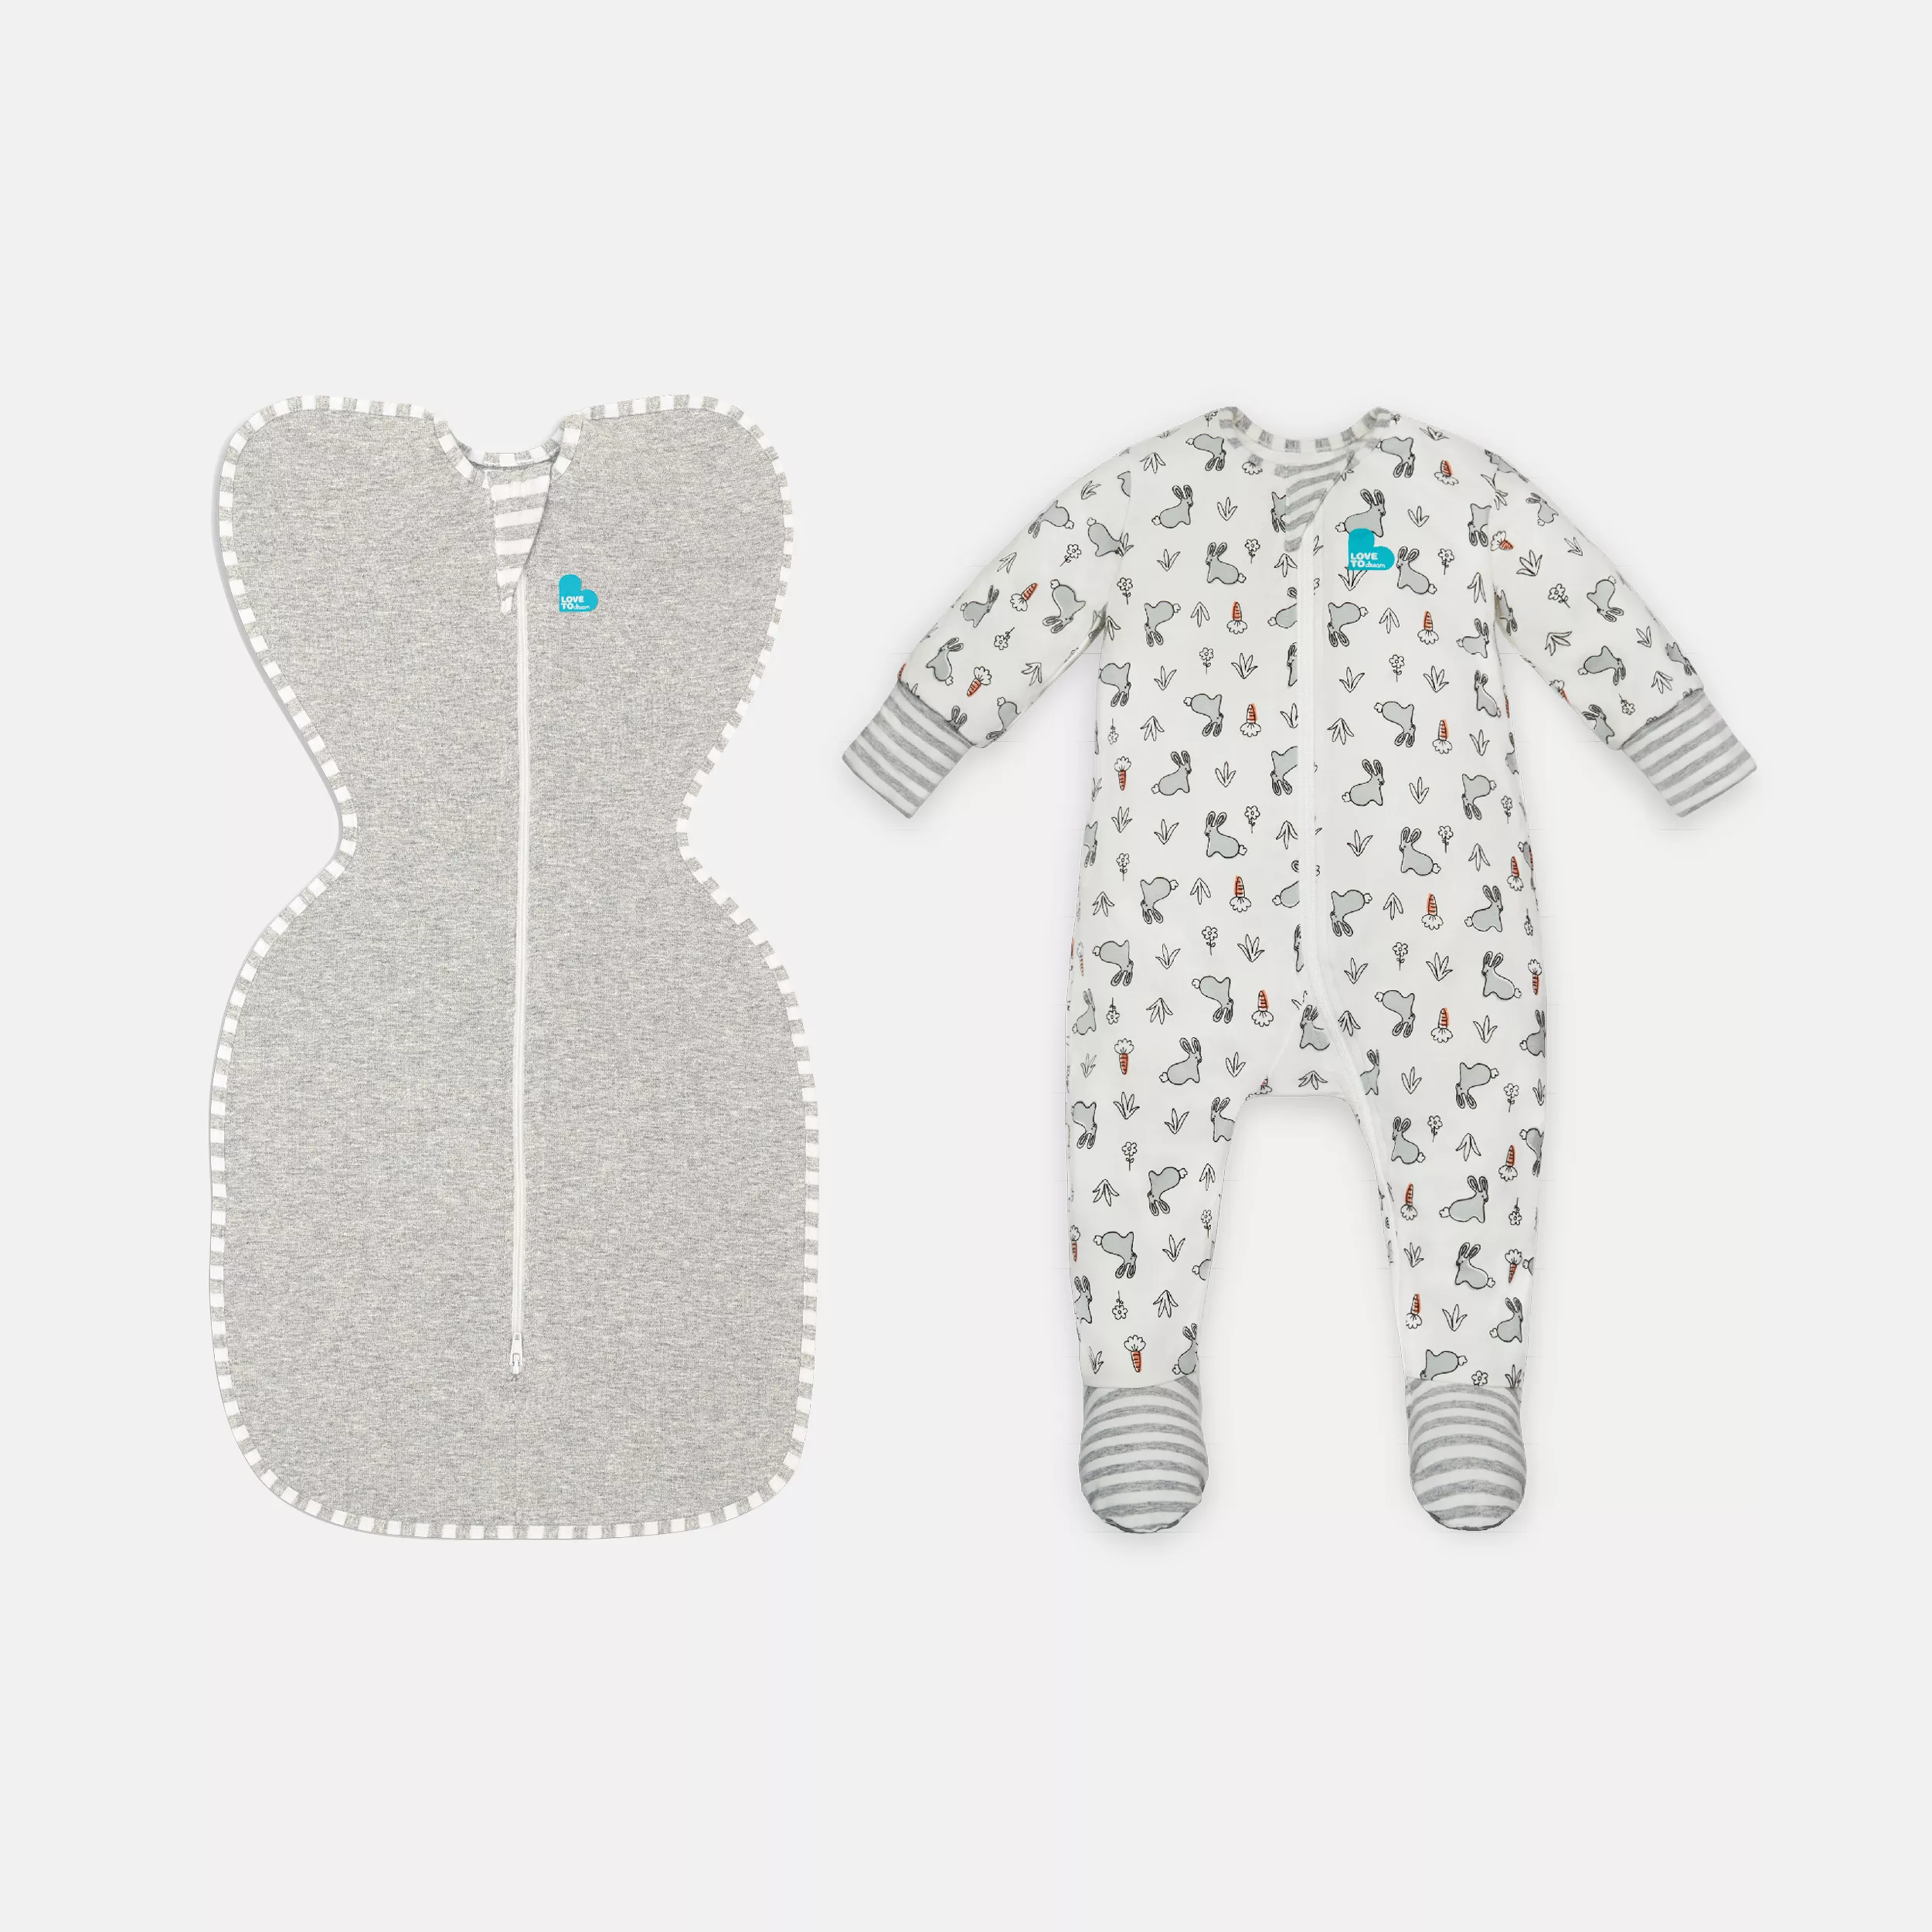 Swaddle Up™ & Romper pack